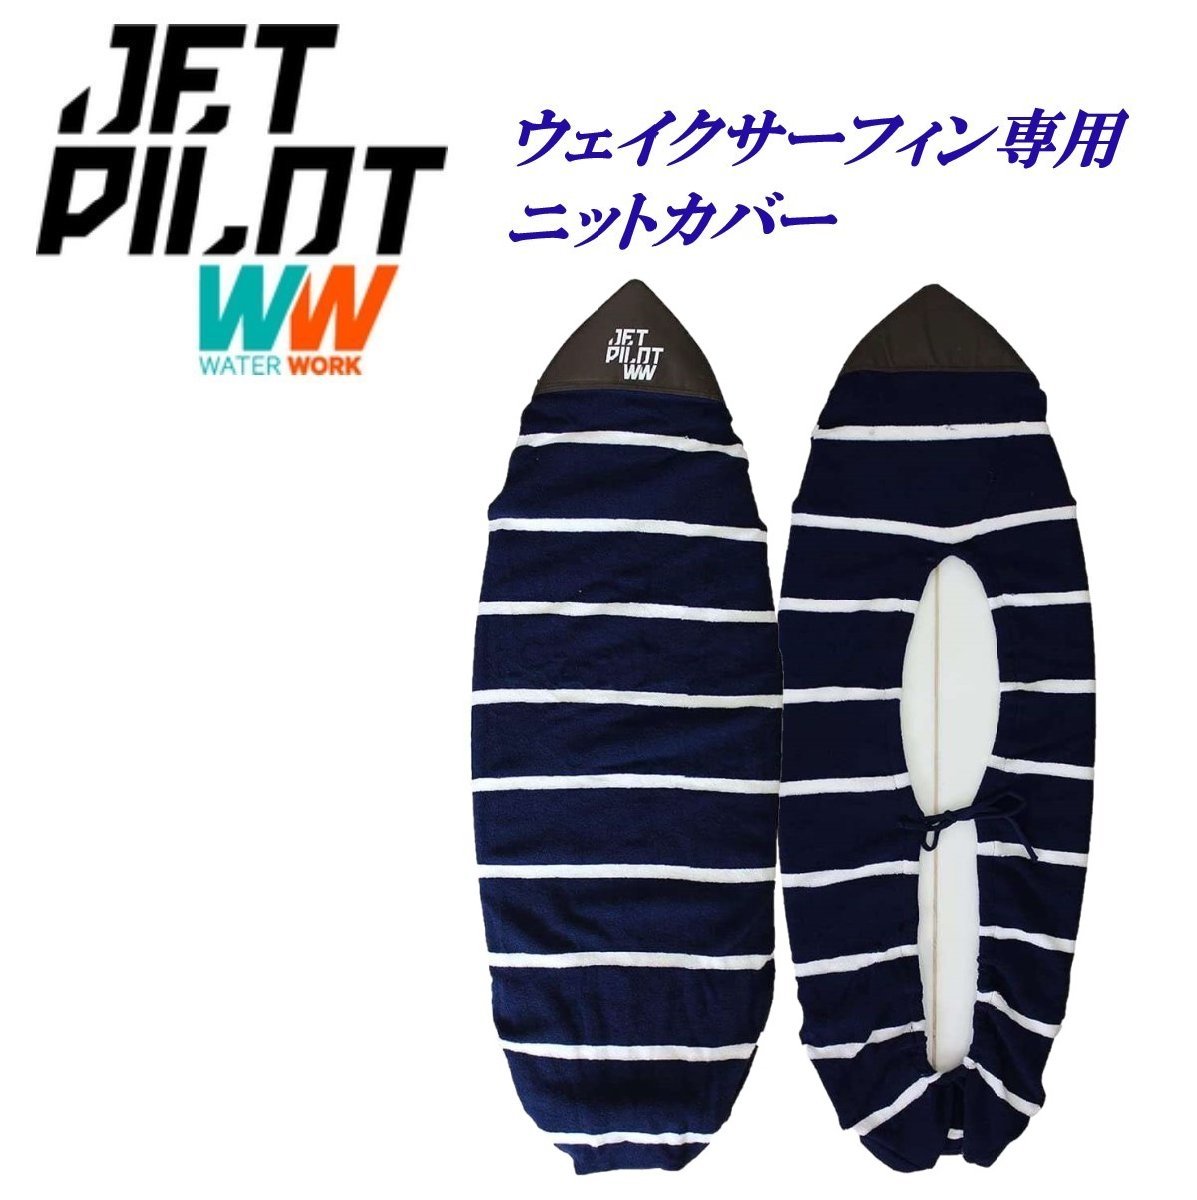  jet Pilot JETPILOT wake surfing exclusive use cover free shipping knitted deck cover JJP21910 navy 